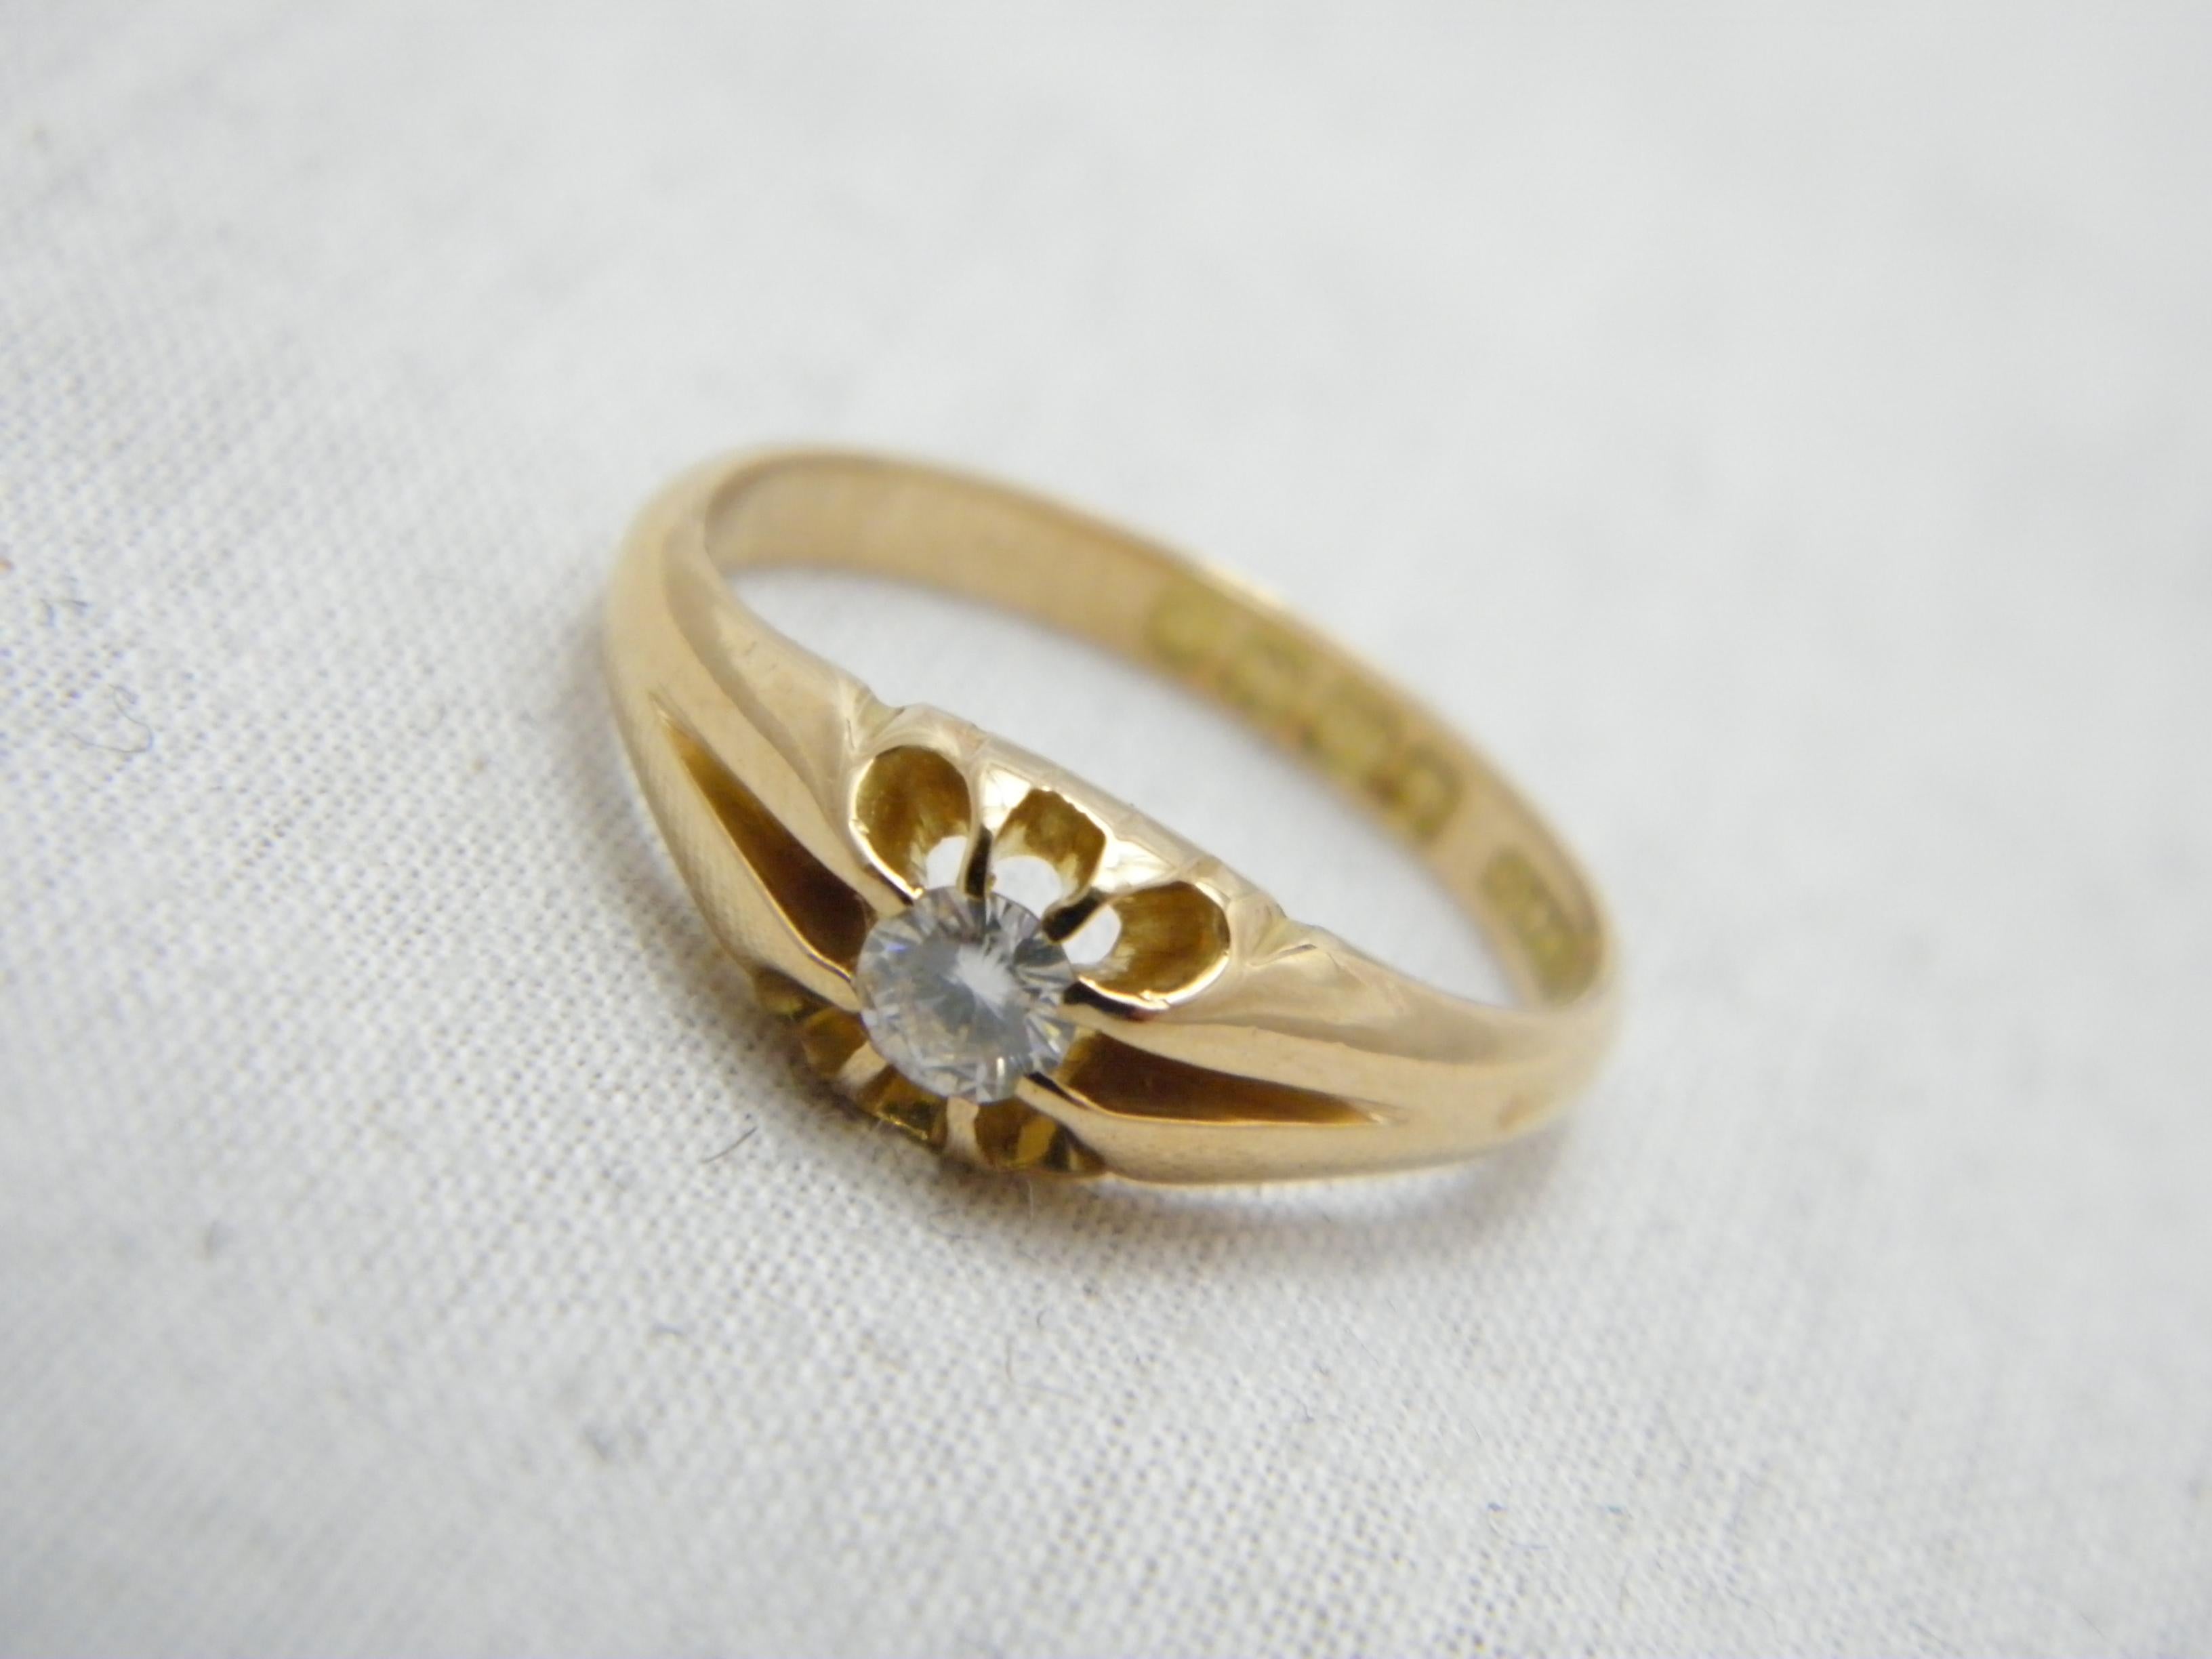 If you have landed on this page then you have an eye for beauty.

On offer is this gorgeous

ANTIQUE c1864 18CT GOLD DIAMOND SOLITAIRE GYPSY RING

DETAILS
Material: 18ct 750/000 Rosey Yellow Gold
This ring has a very thick and sturdy shank hence